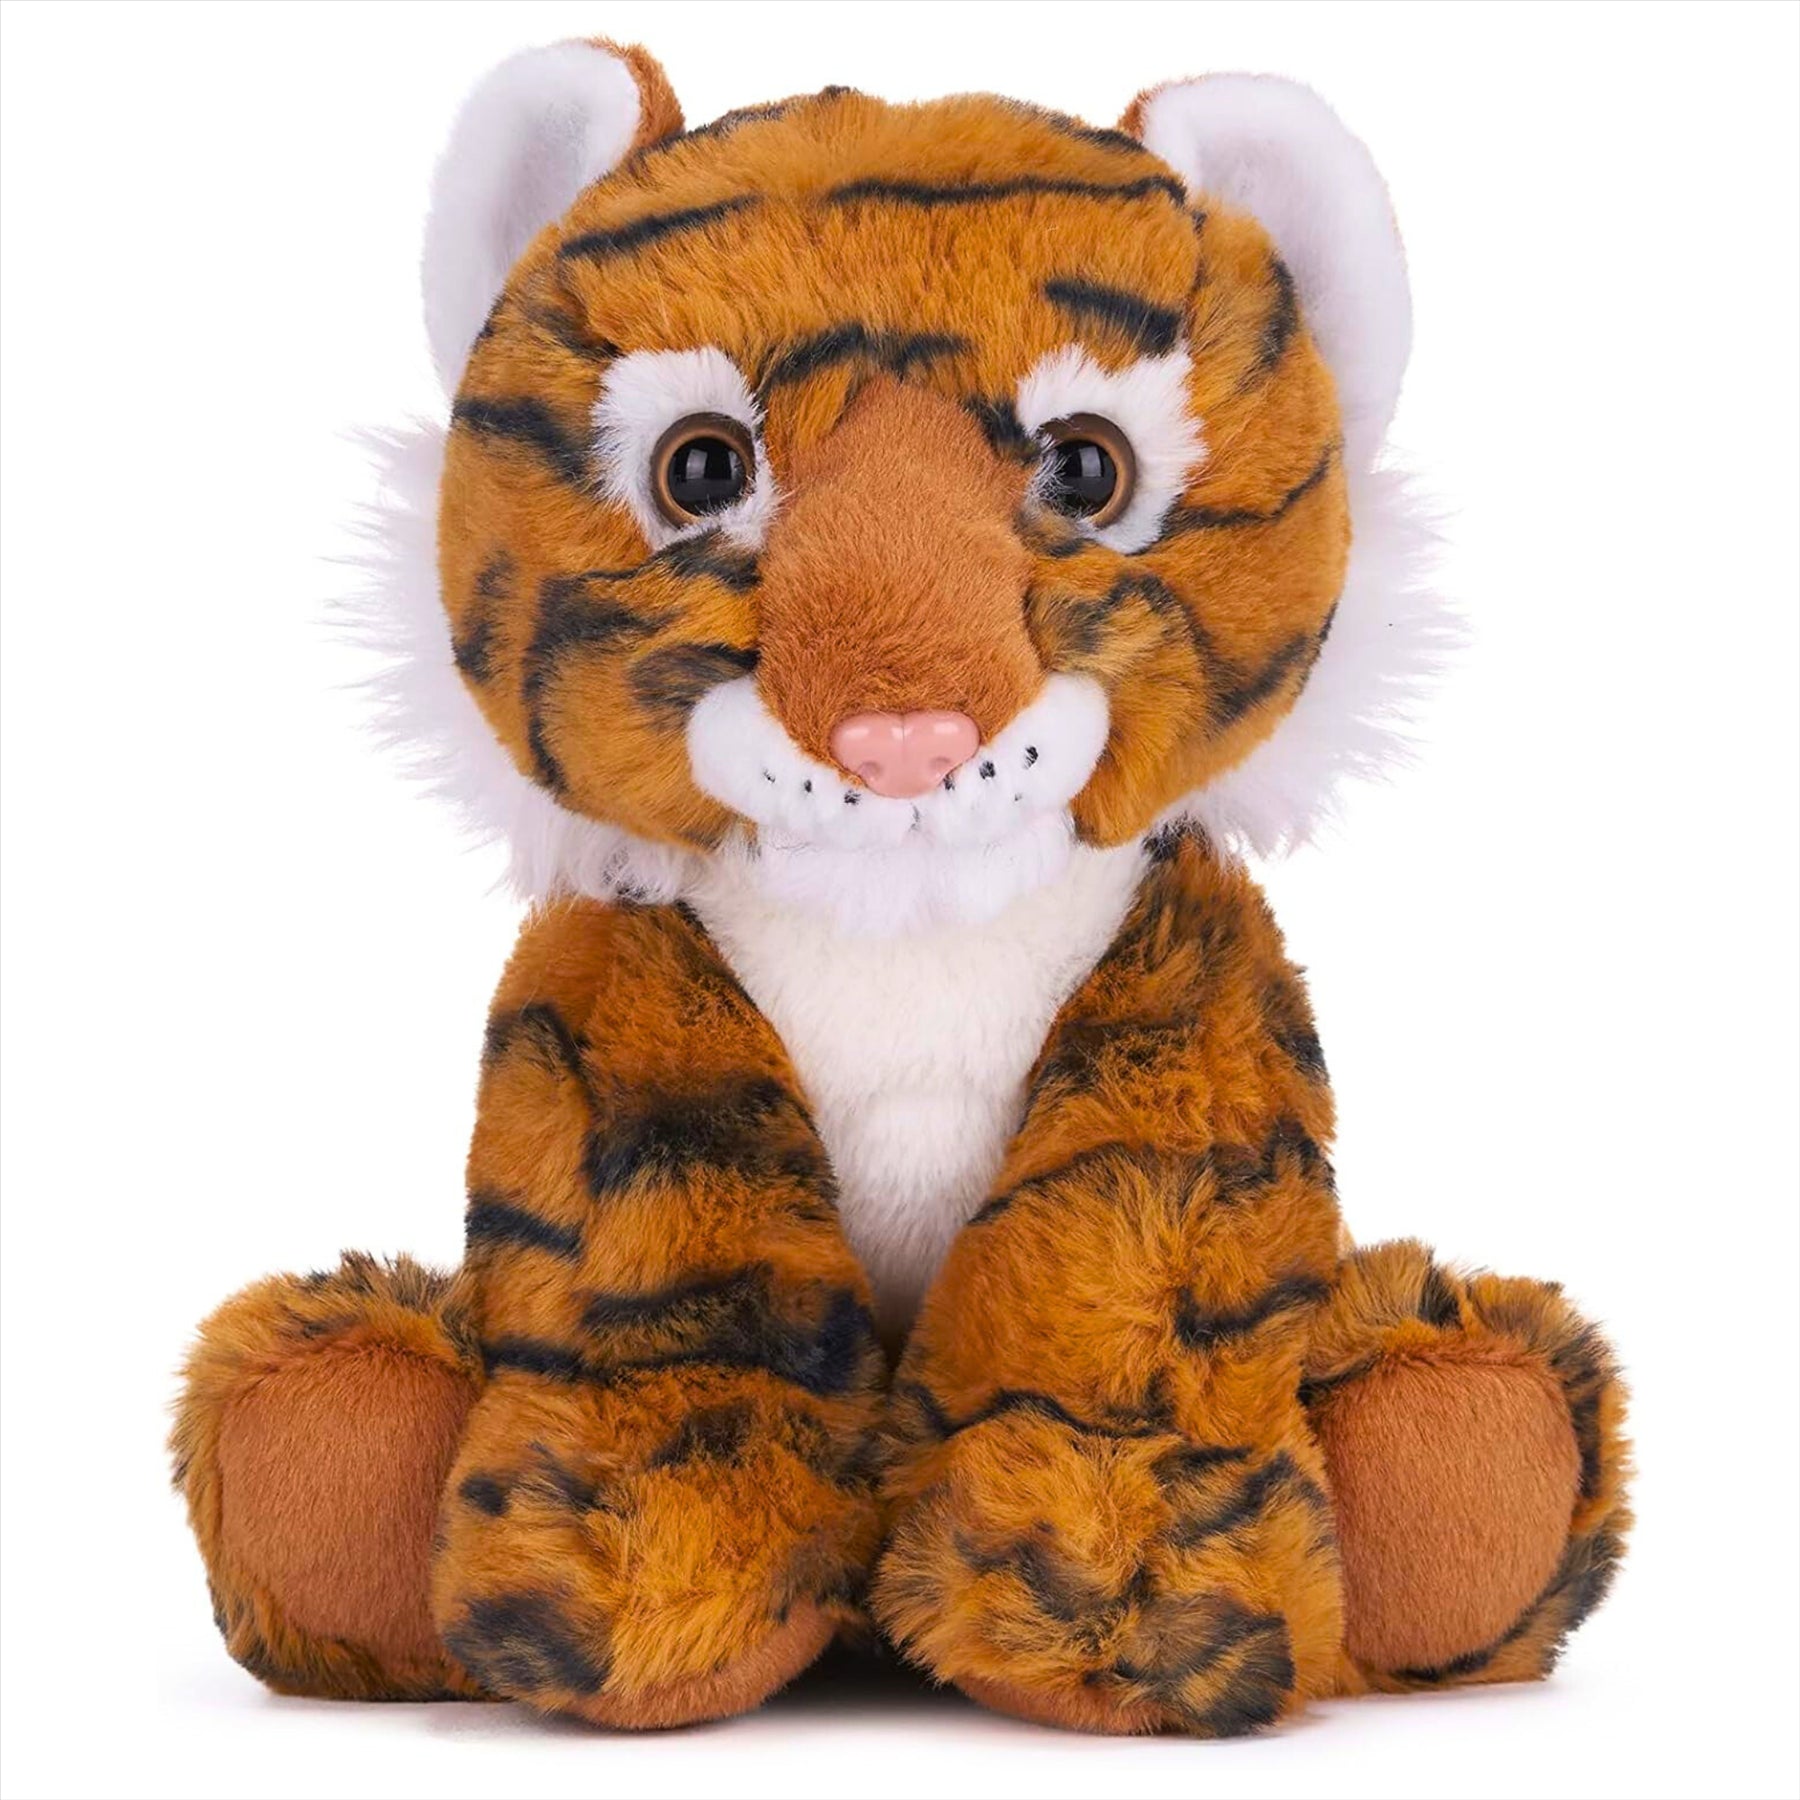 Posh Paws Out of Africa Animals Collection Tiger Super Soft Plush Toy 30cm 12"